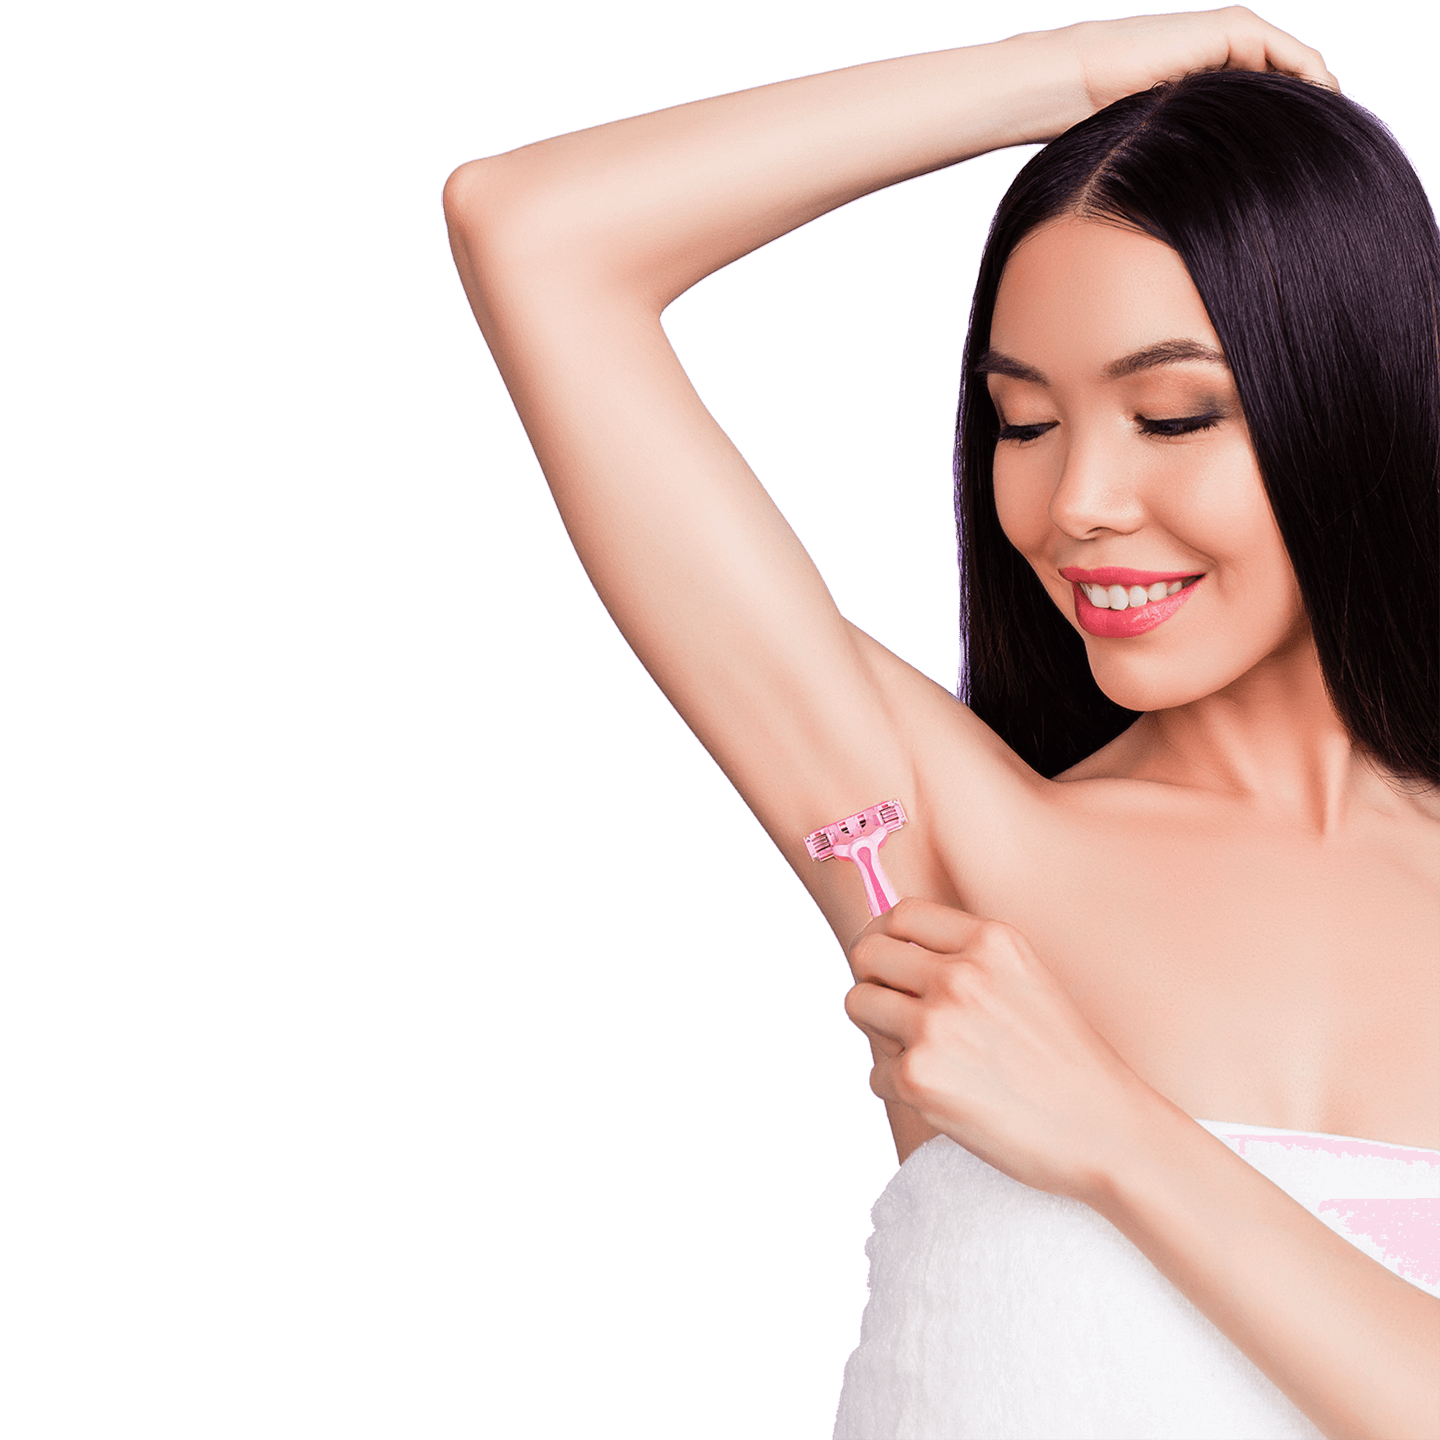 How to help prevent ingrown hairs